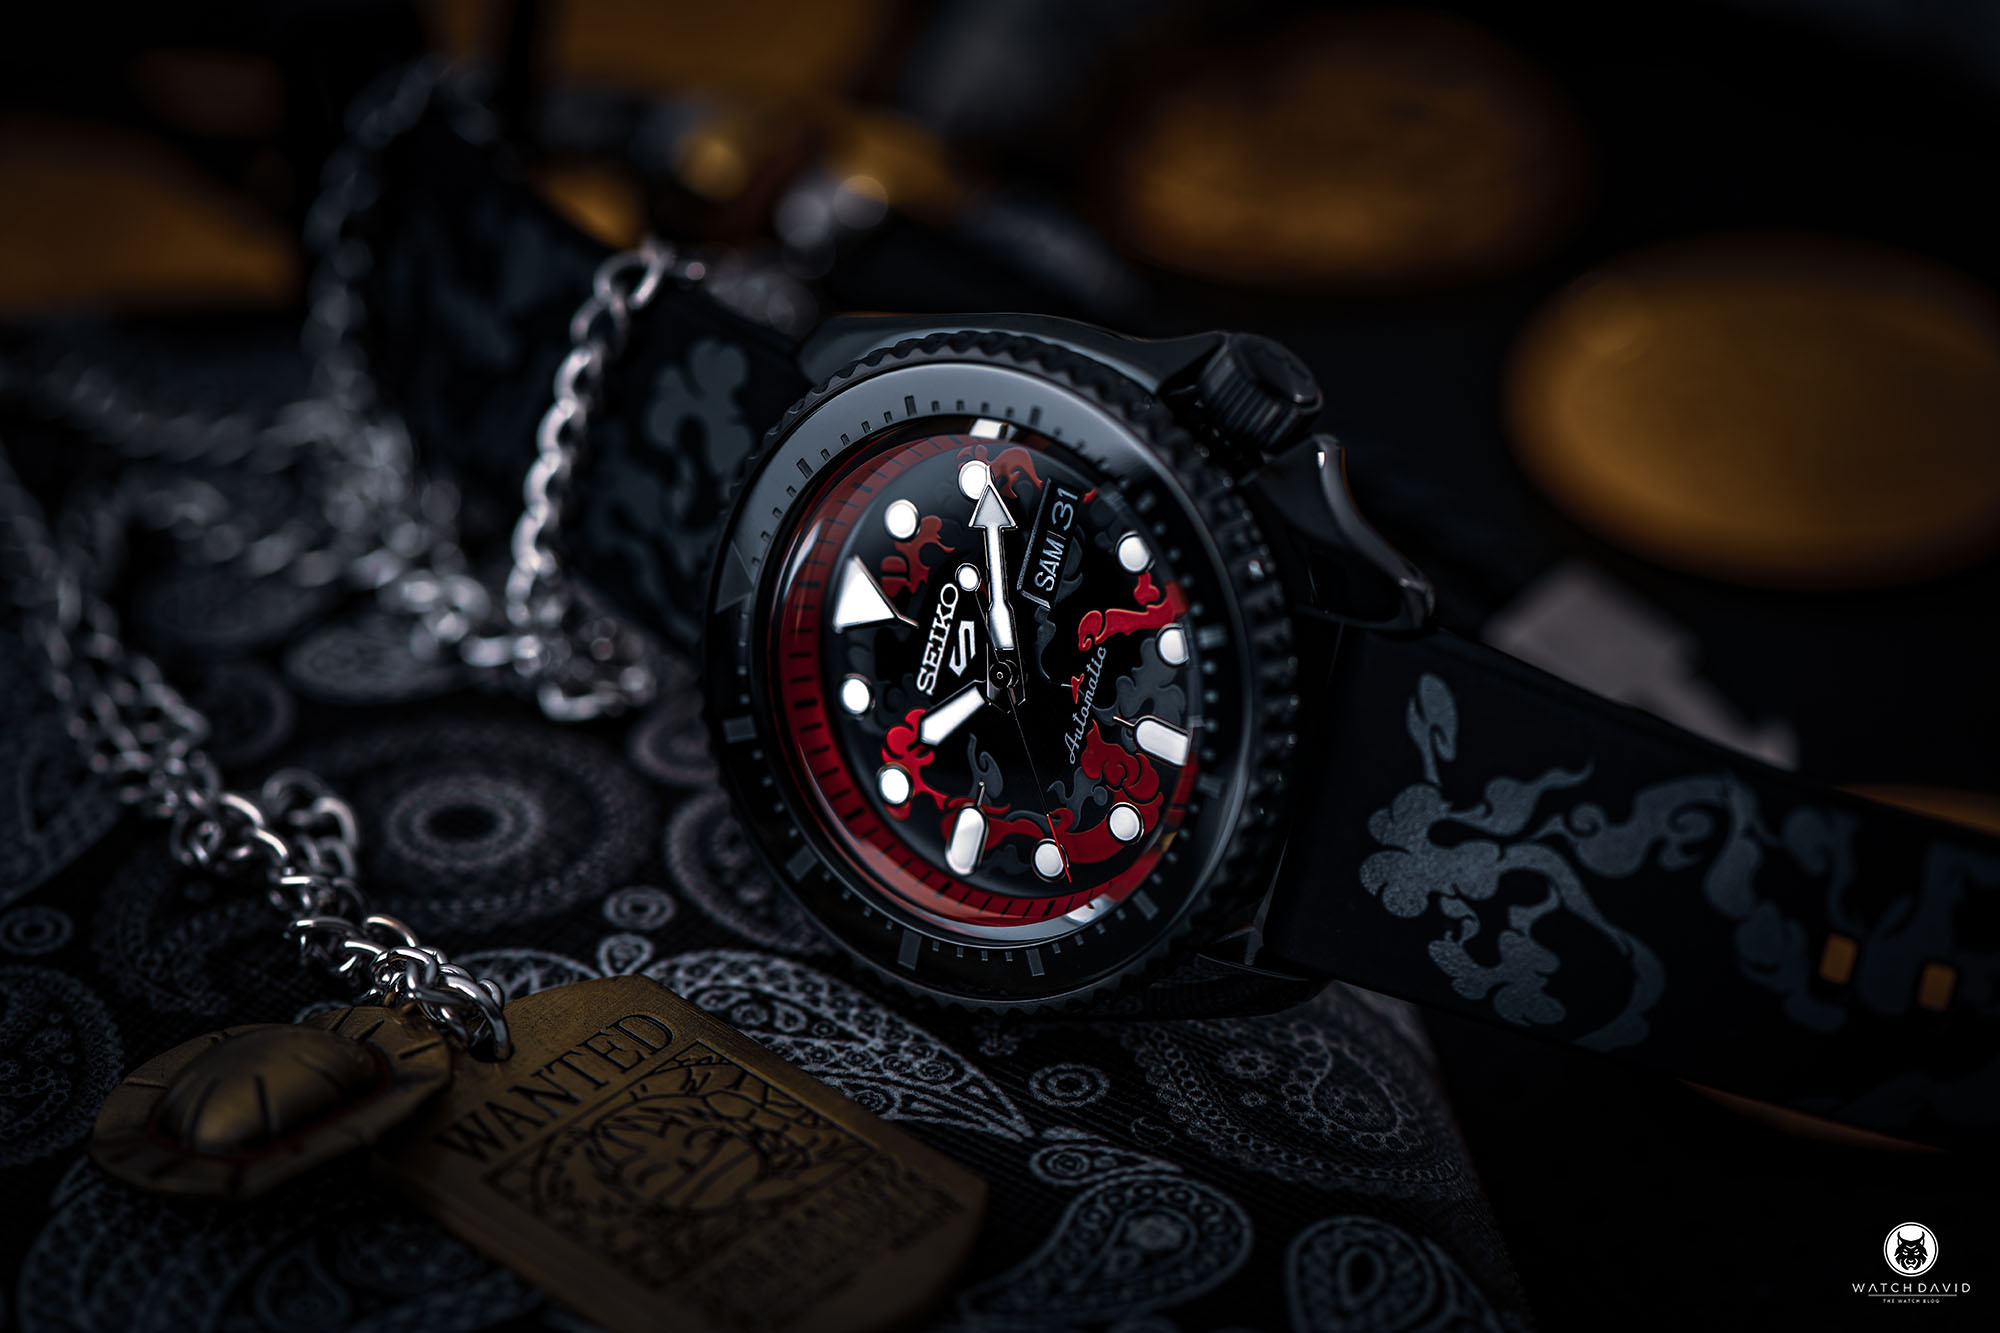 One Piece Teams Up with Seiko for 20th Anniversary Watch